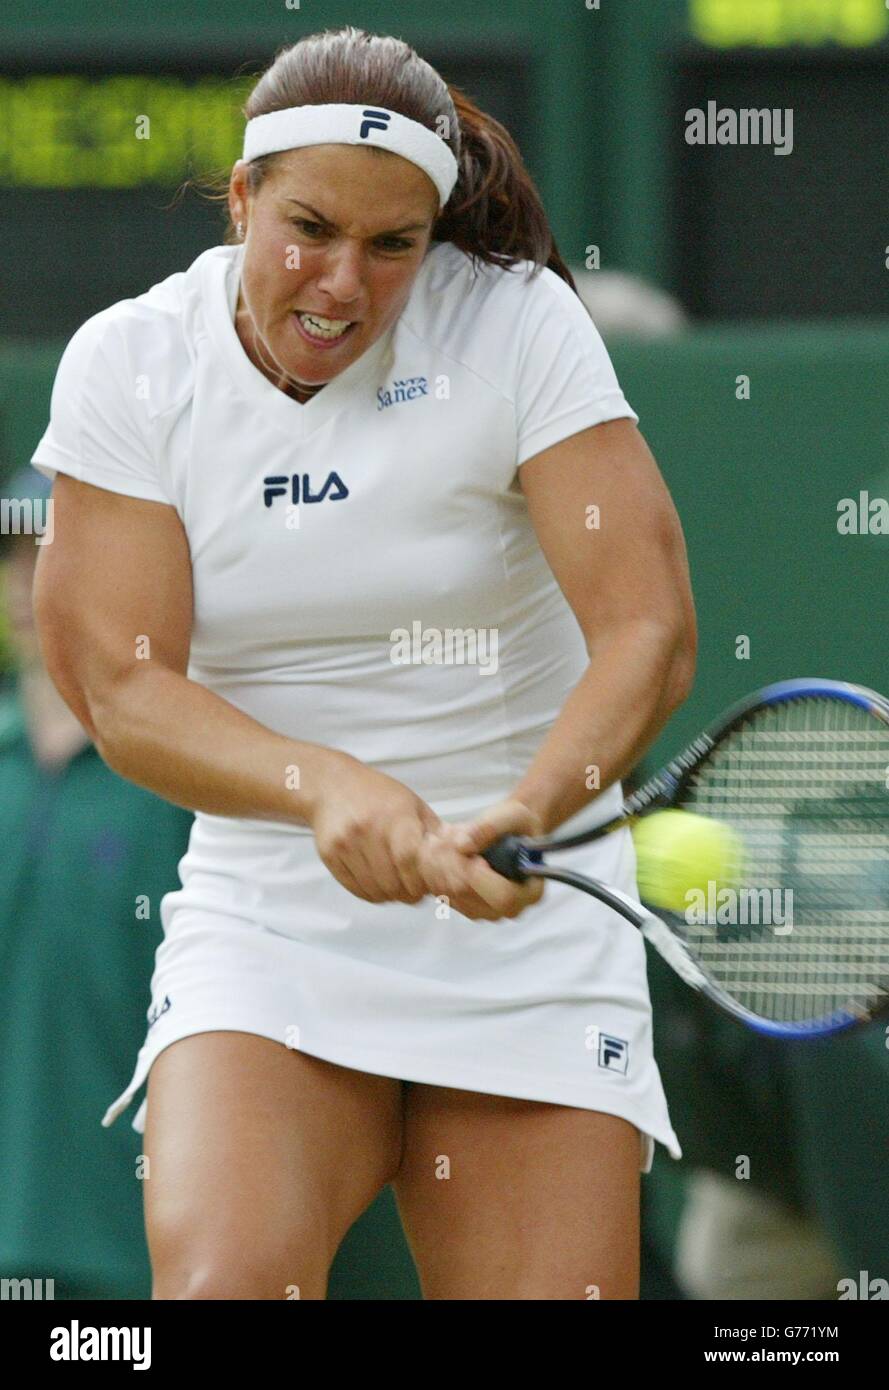 , NO COMMERCIAL USE. Jennifer Capriati, the 3rd seed from the USA in action against Amelie Mauresmo of France, the 9th seed on Centre Court at Wimbledon. Stock Photo